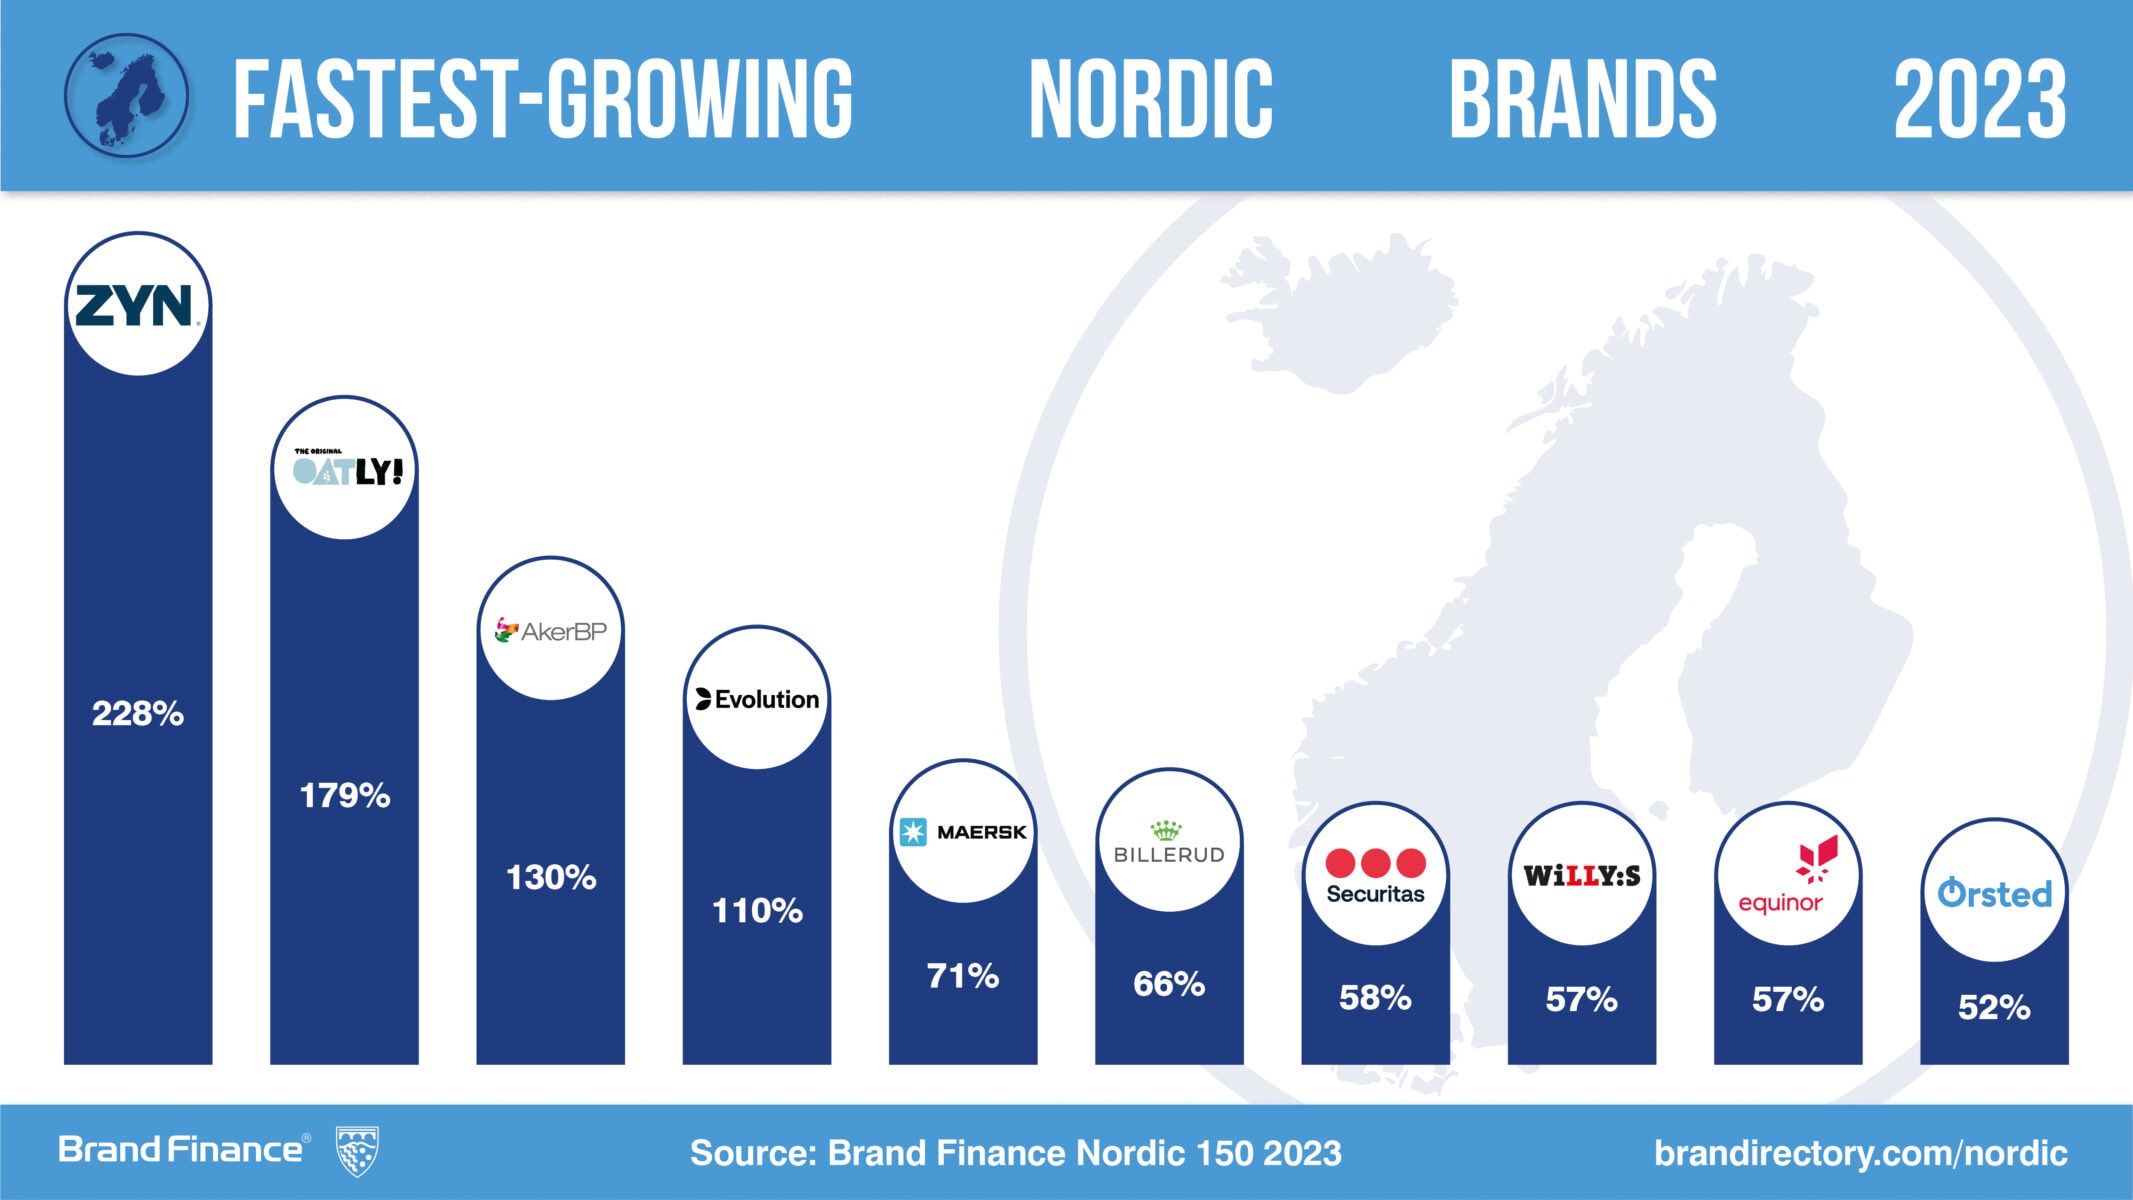 IKEA is reigning champion of Nordic brands but contends with